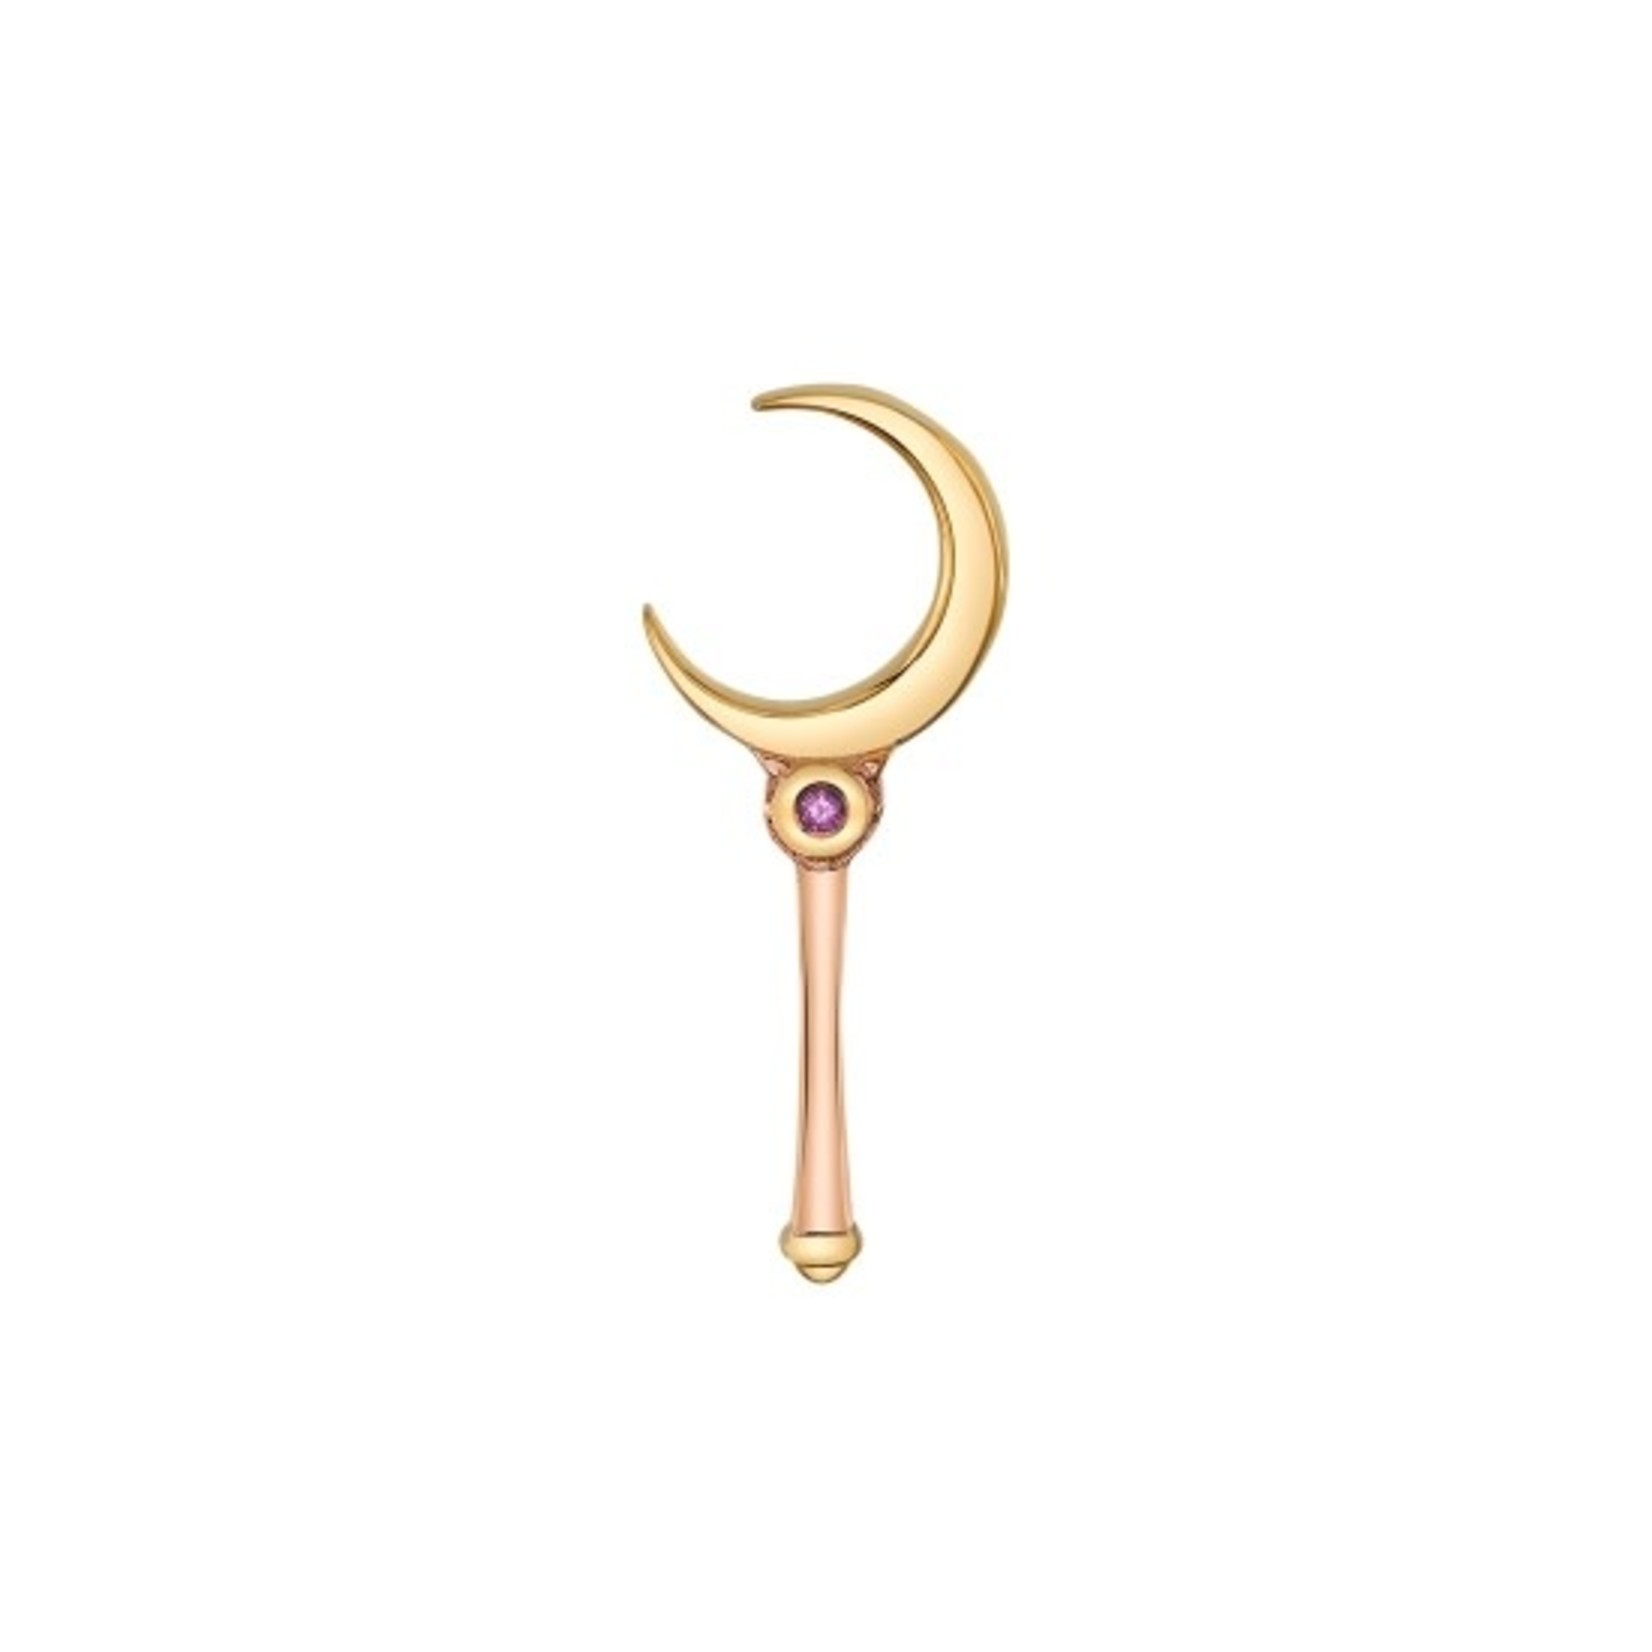 BVLA BVLA rose gold "Hey Sailor" threaded end with 0.8 pink sapphire and 24k plated moon and handle end